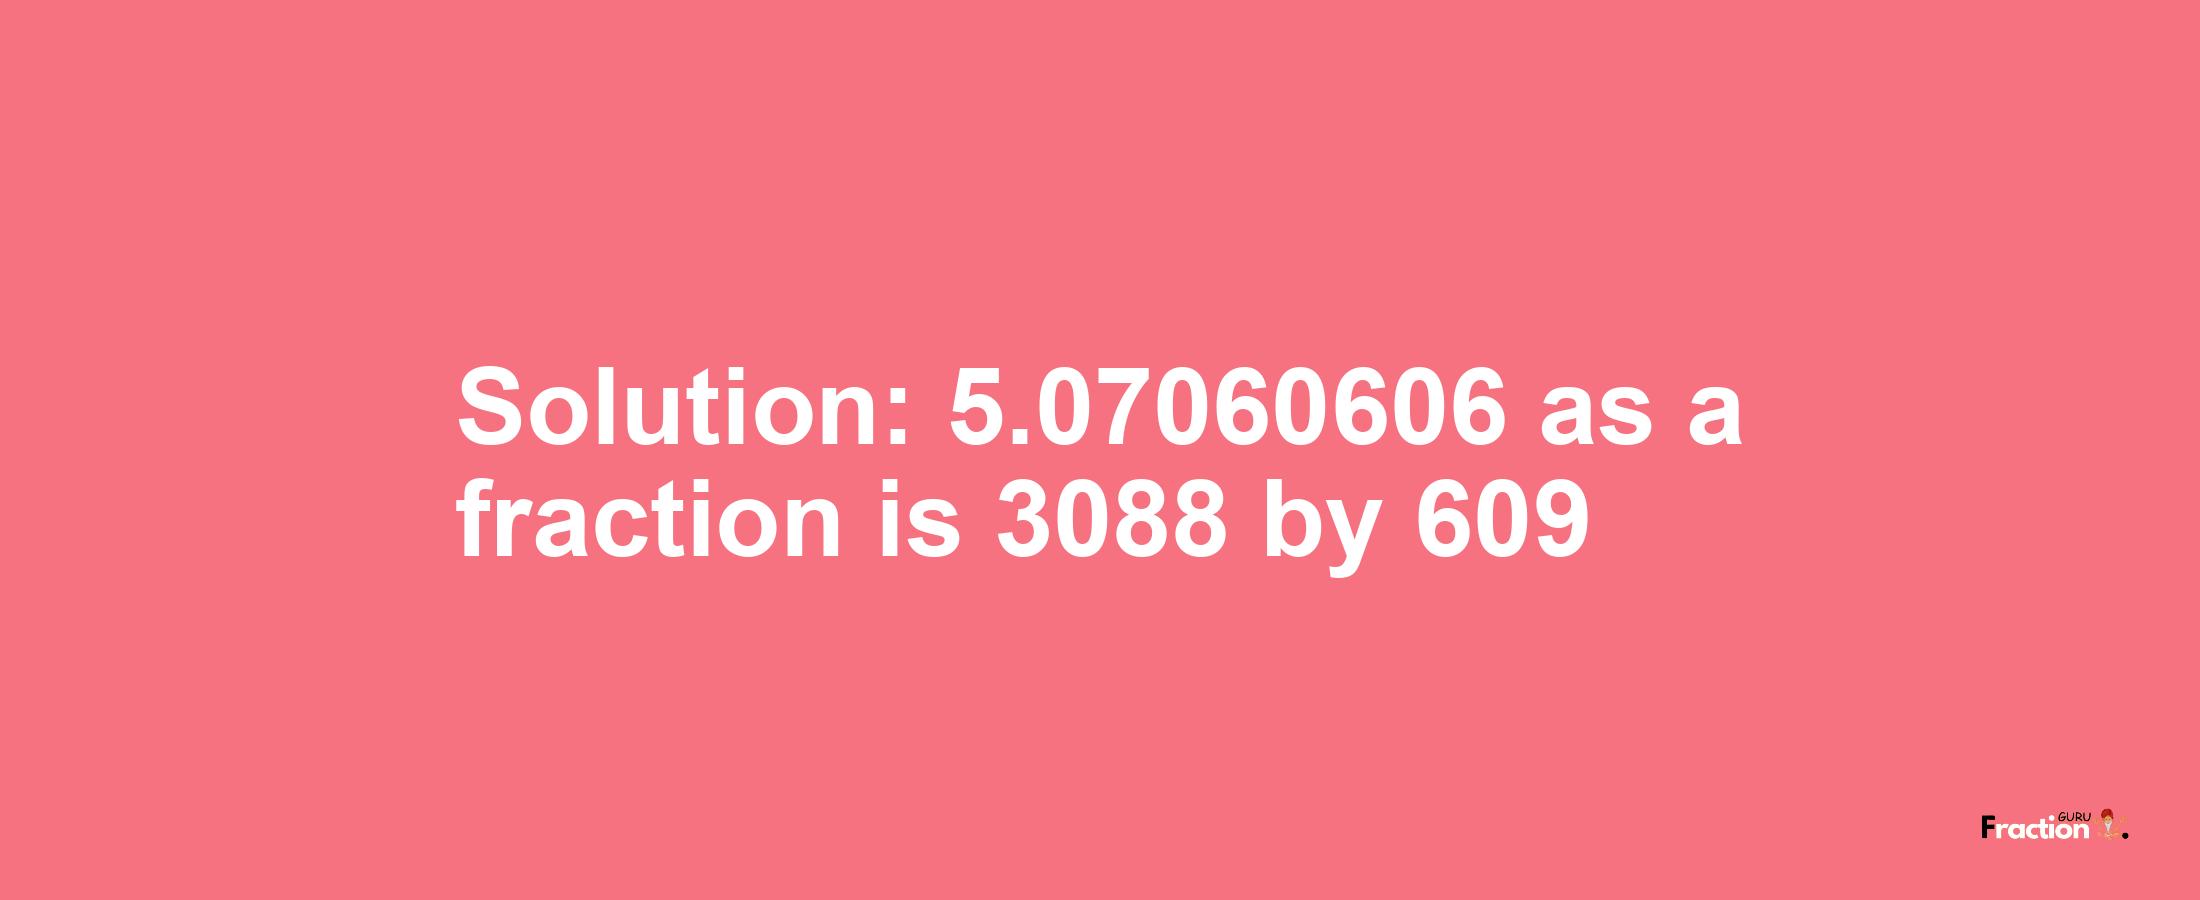 Solution:5.07060606 as a fraction is 3088/609